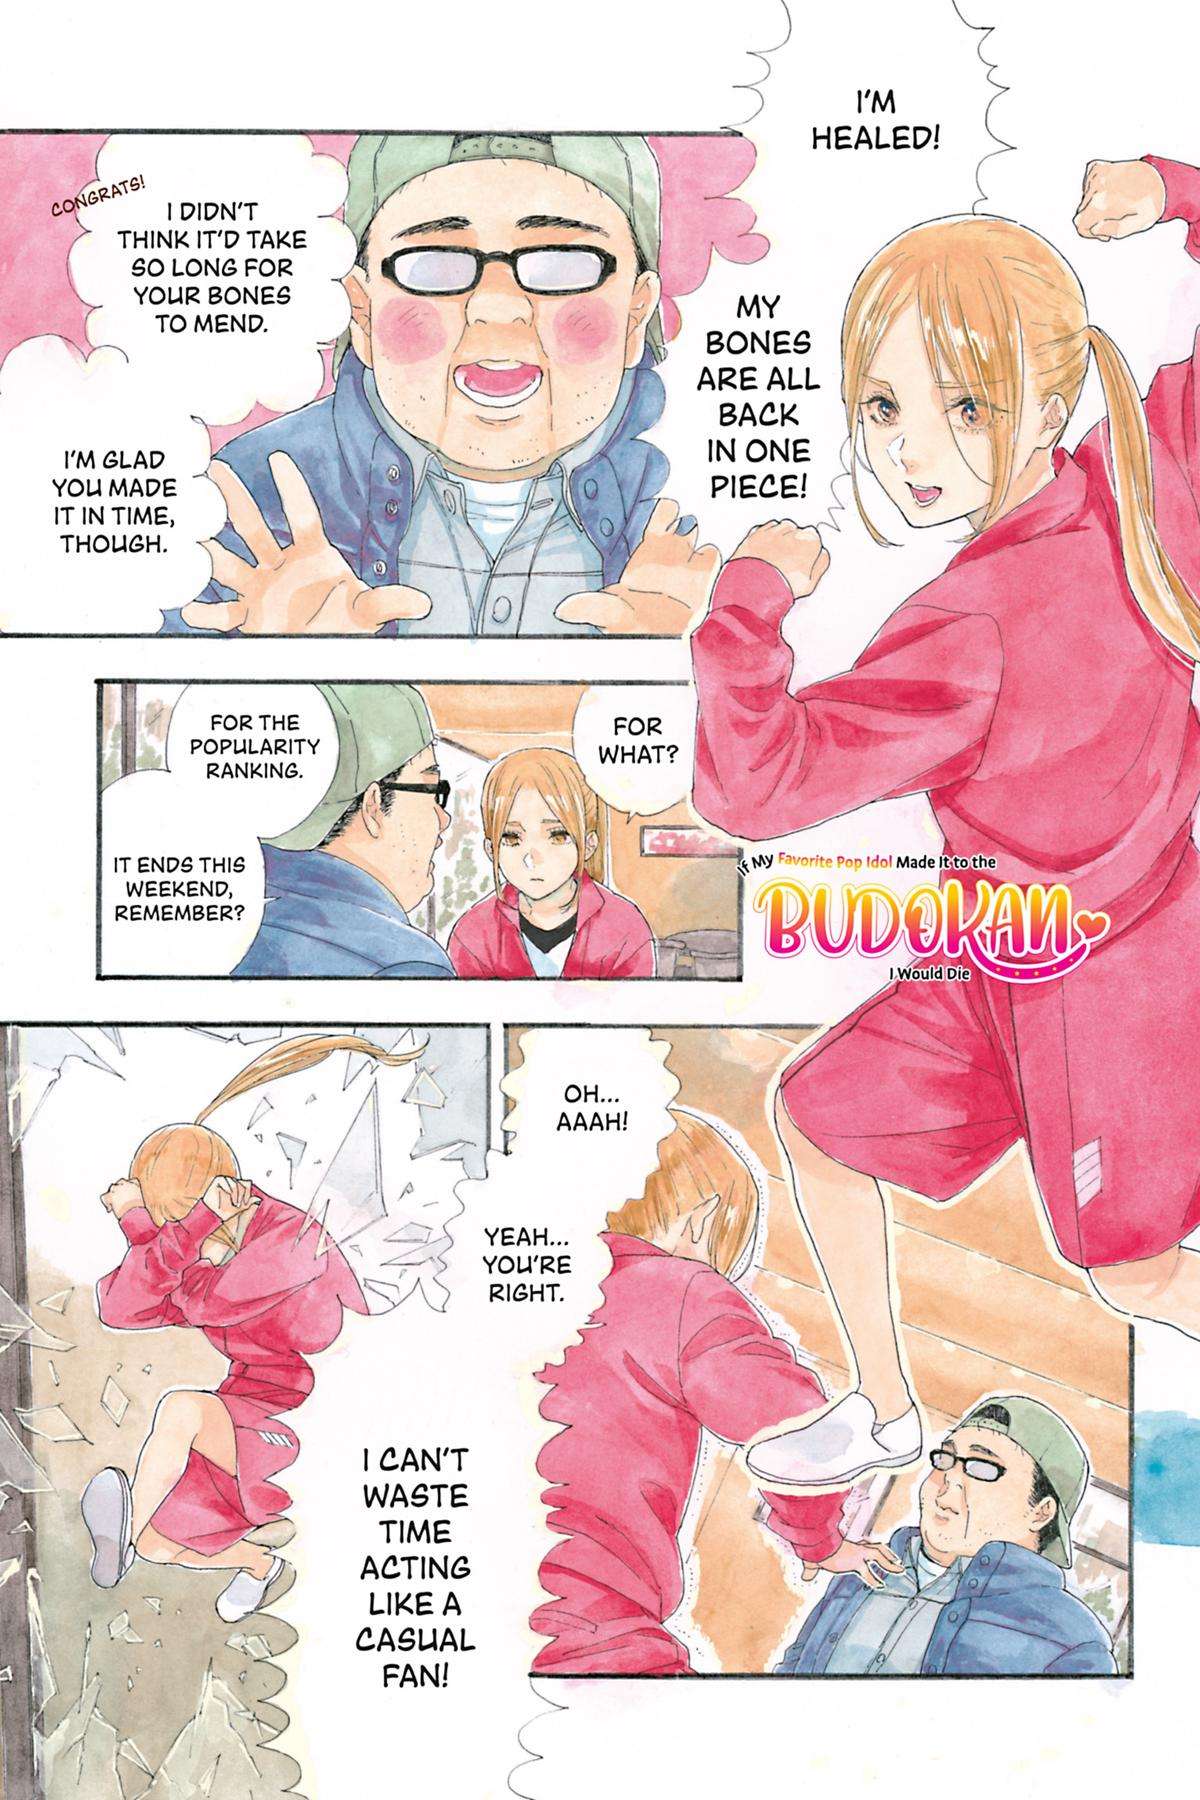 If My Favorite Pop Idol Made It to the Budokan, I Would Die - chapter 13 - #2